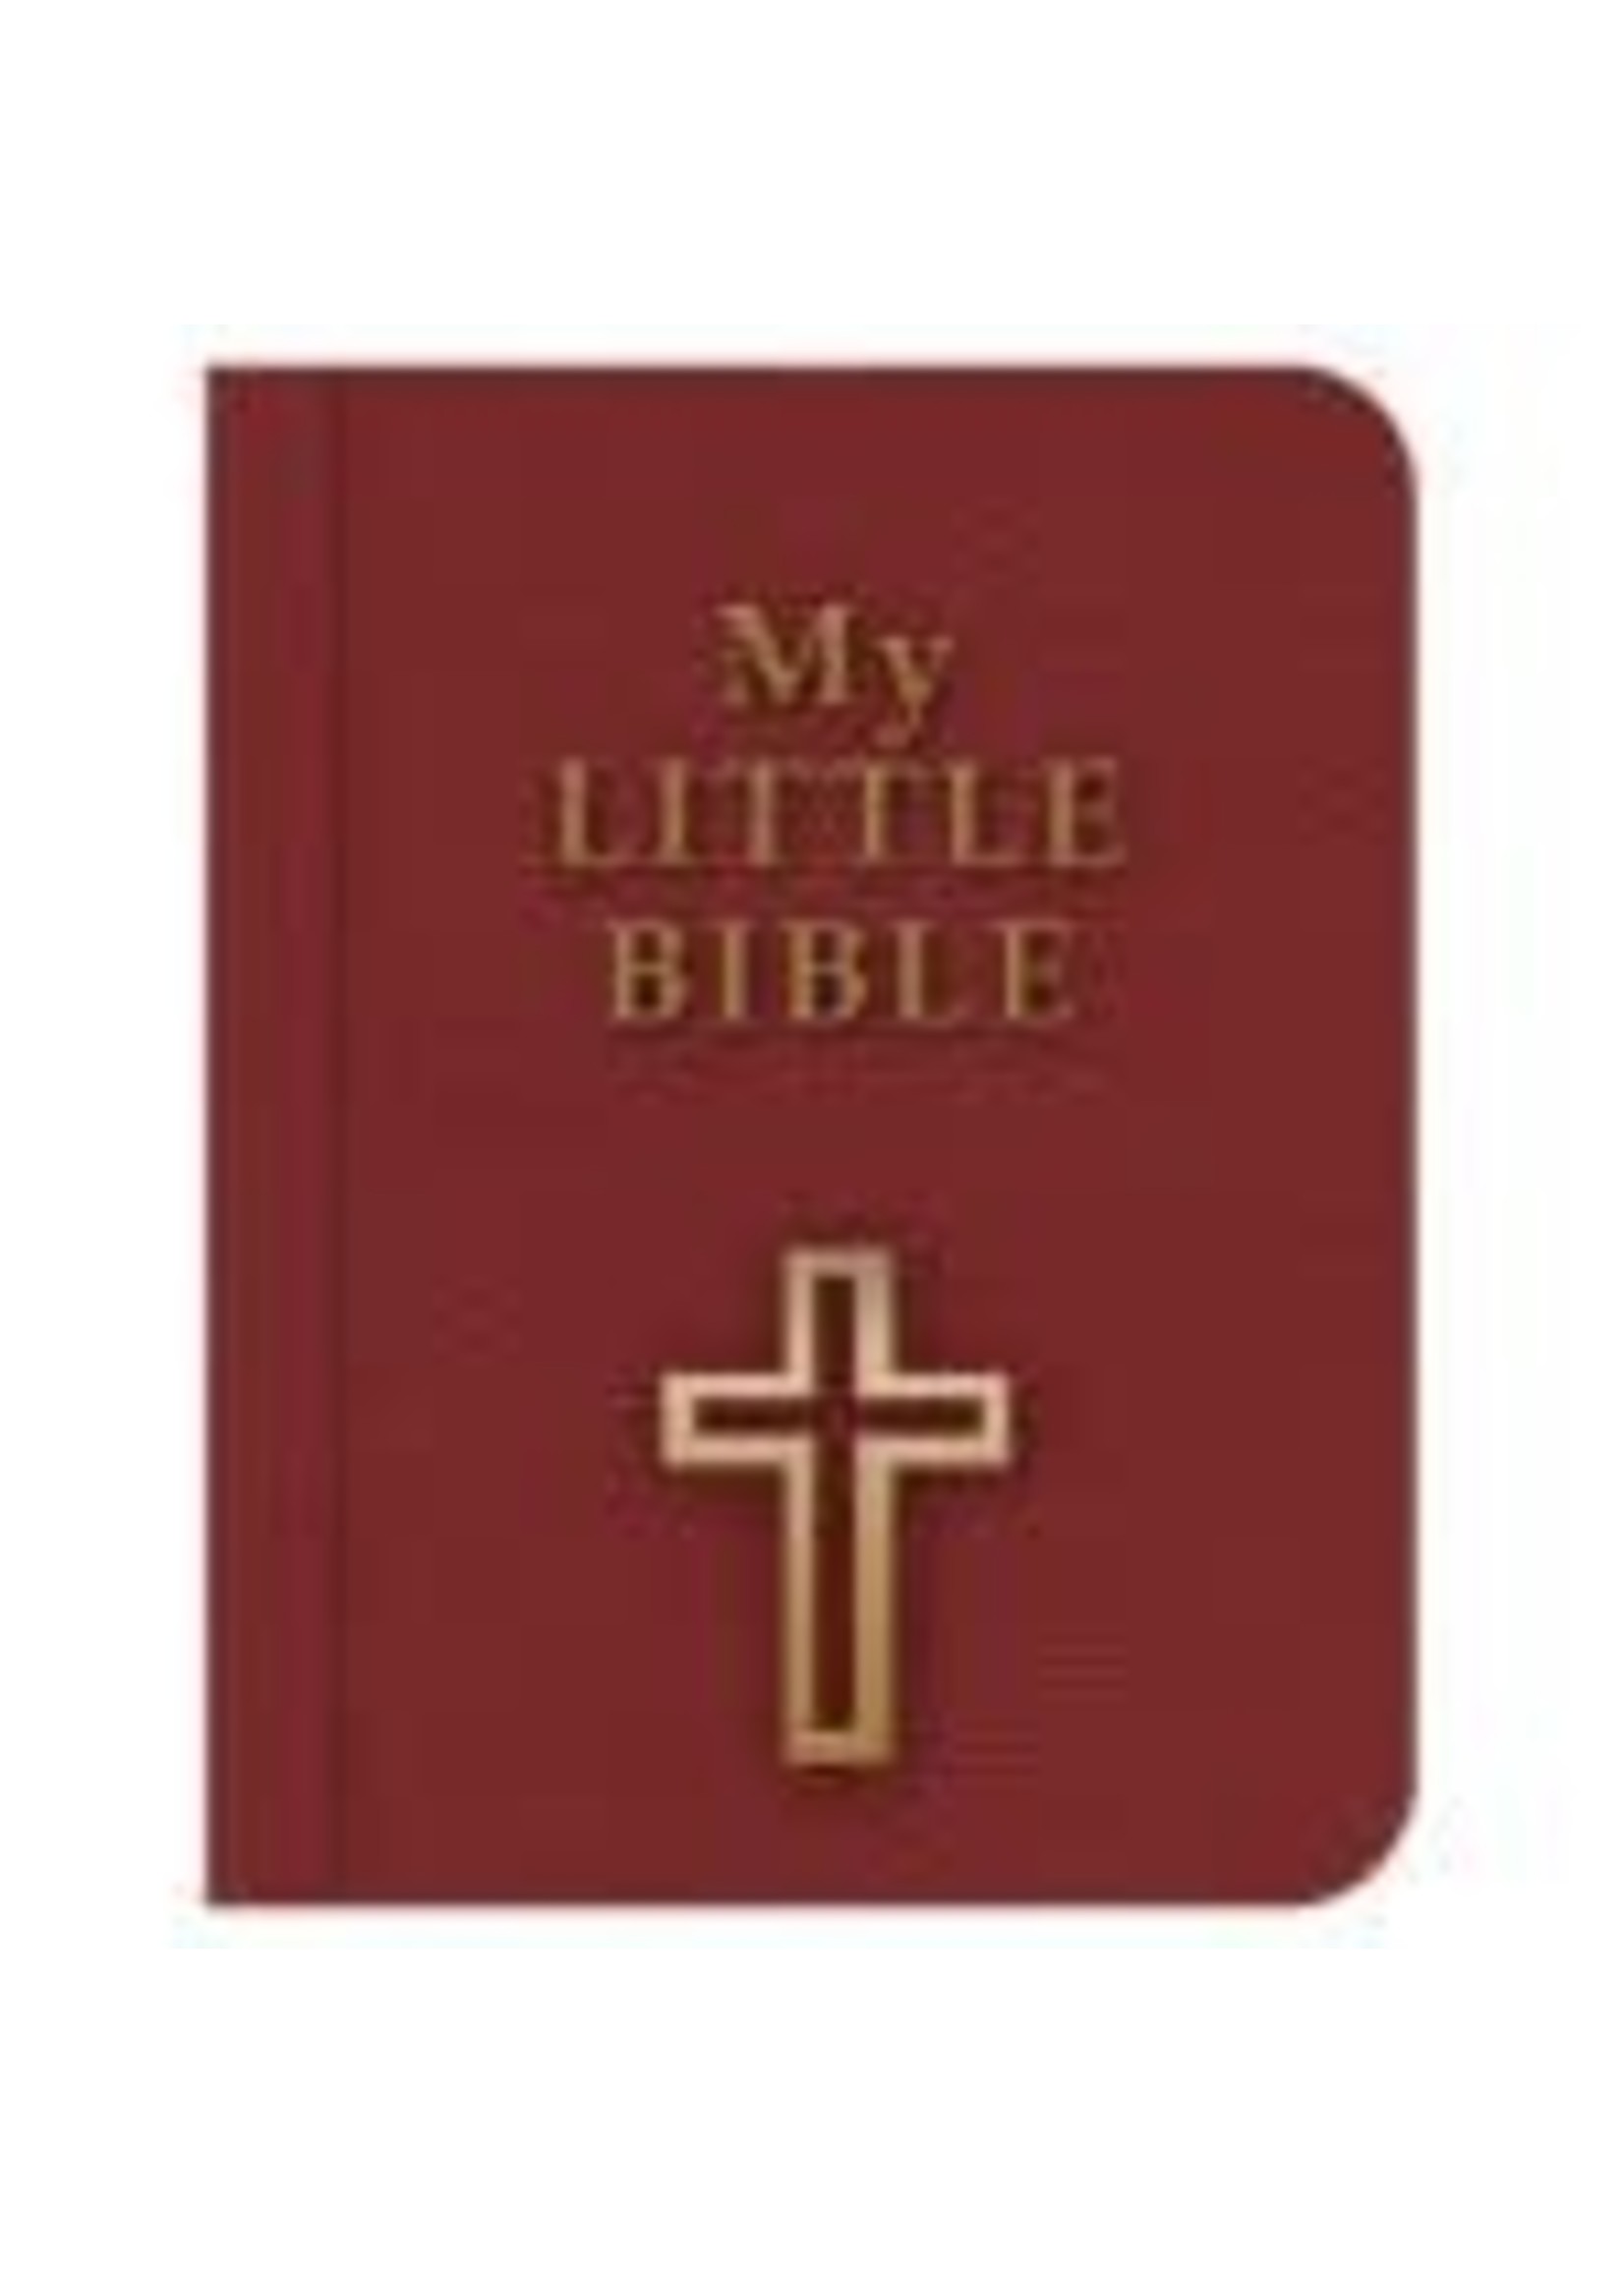 My Little Bible - Red